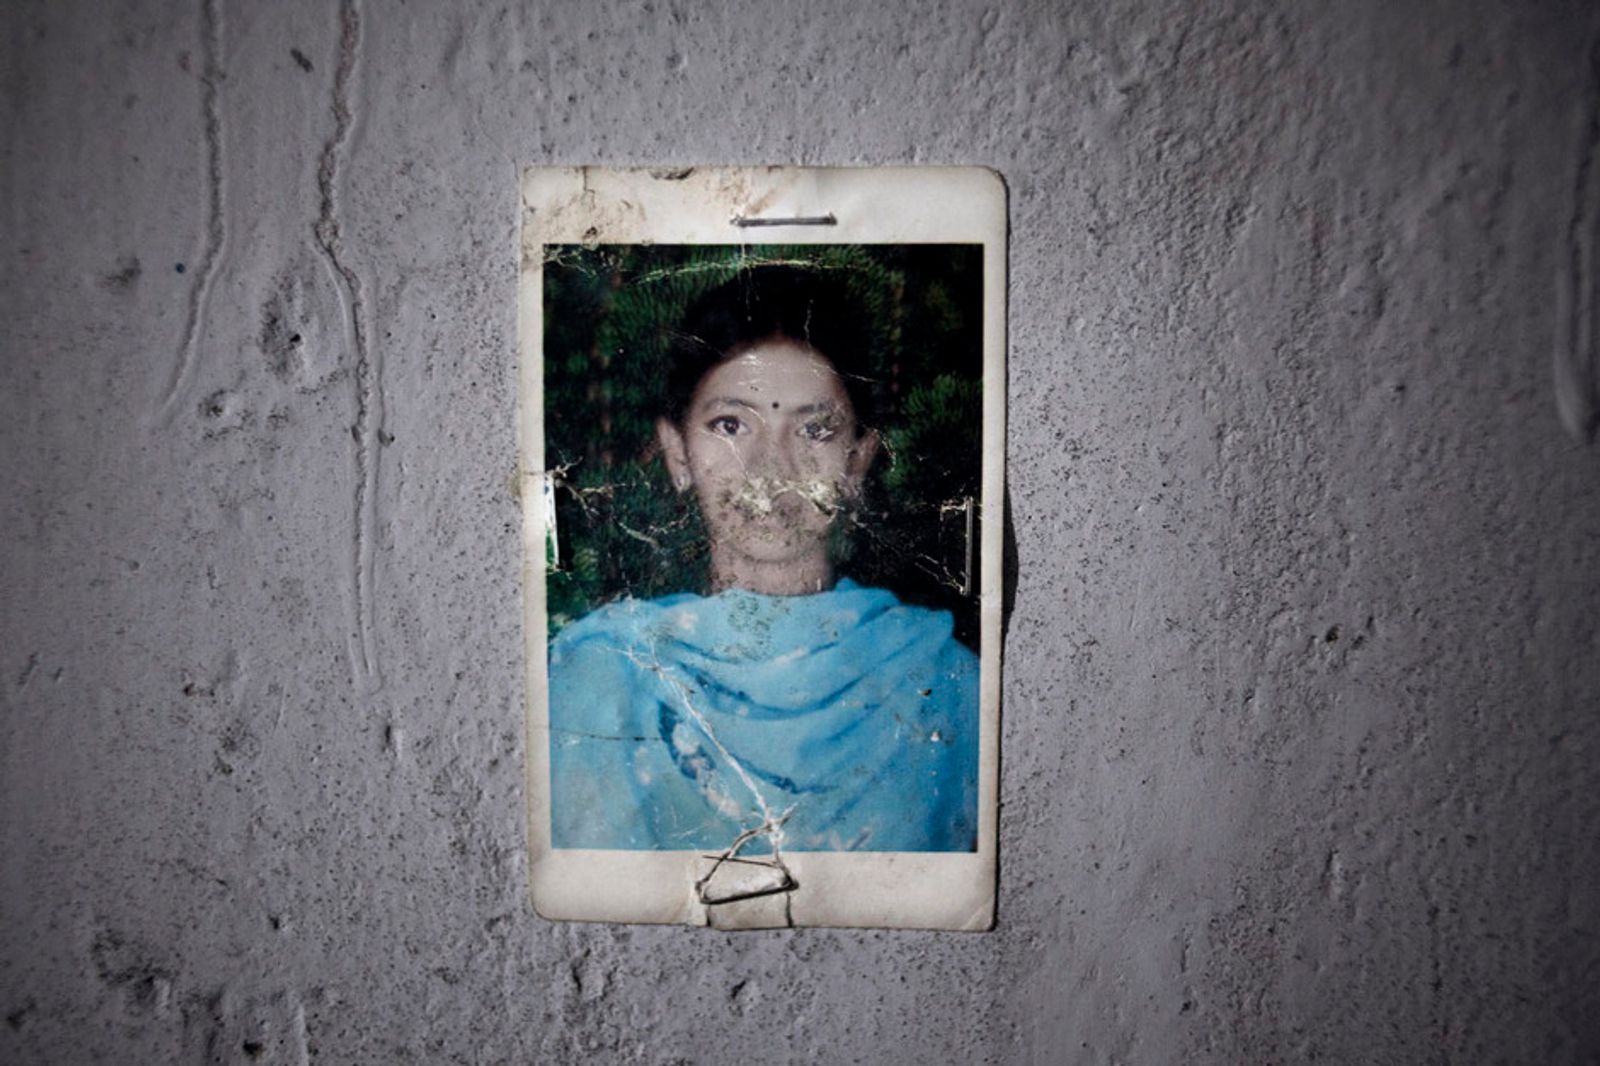 © Taslima Akhter - Image from the  Death of A Thousand Dreams photography project